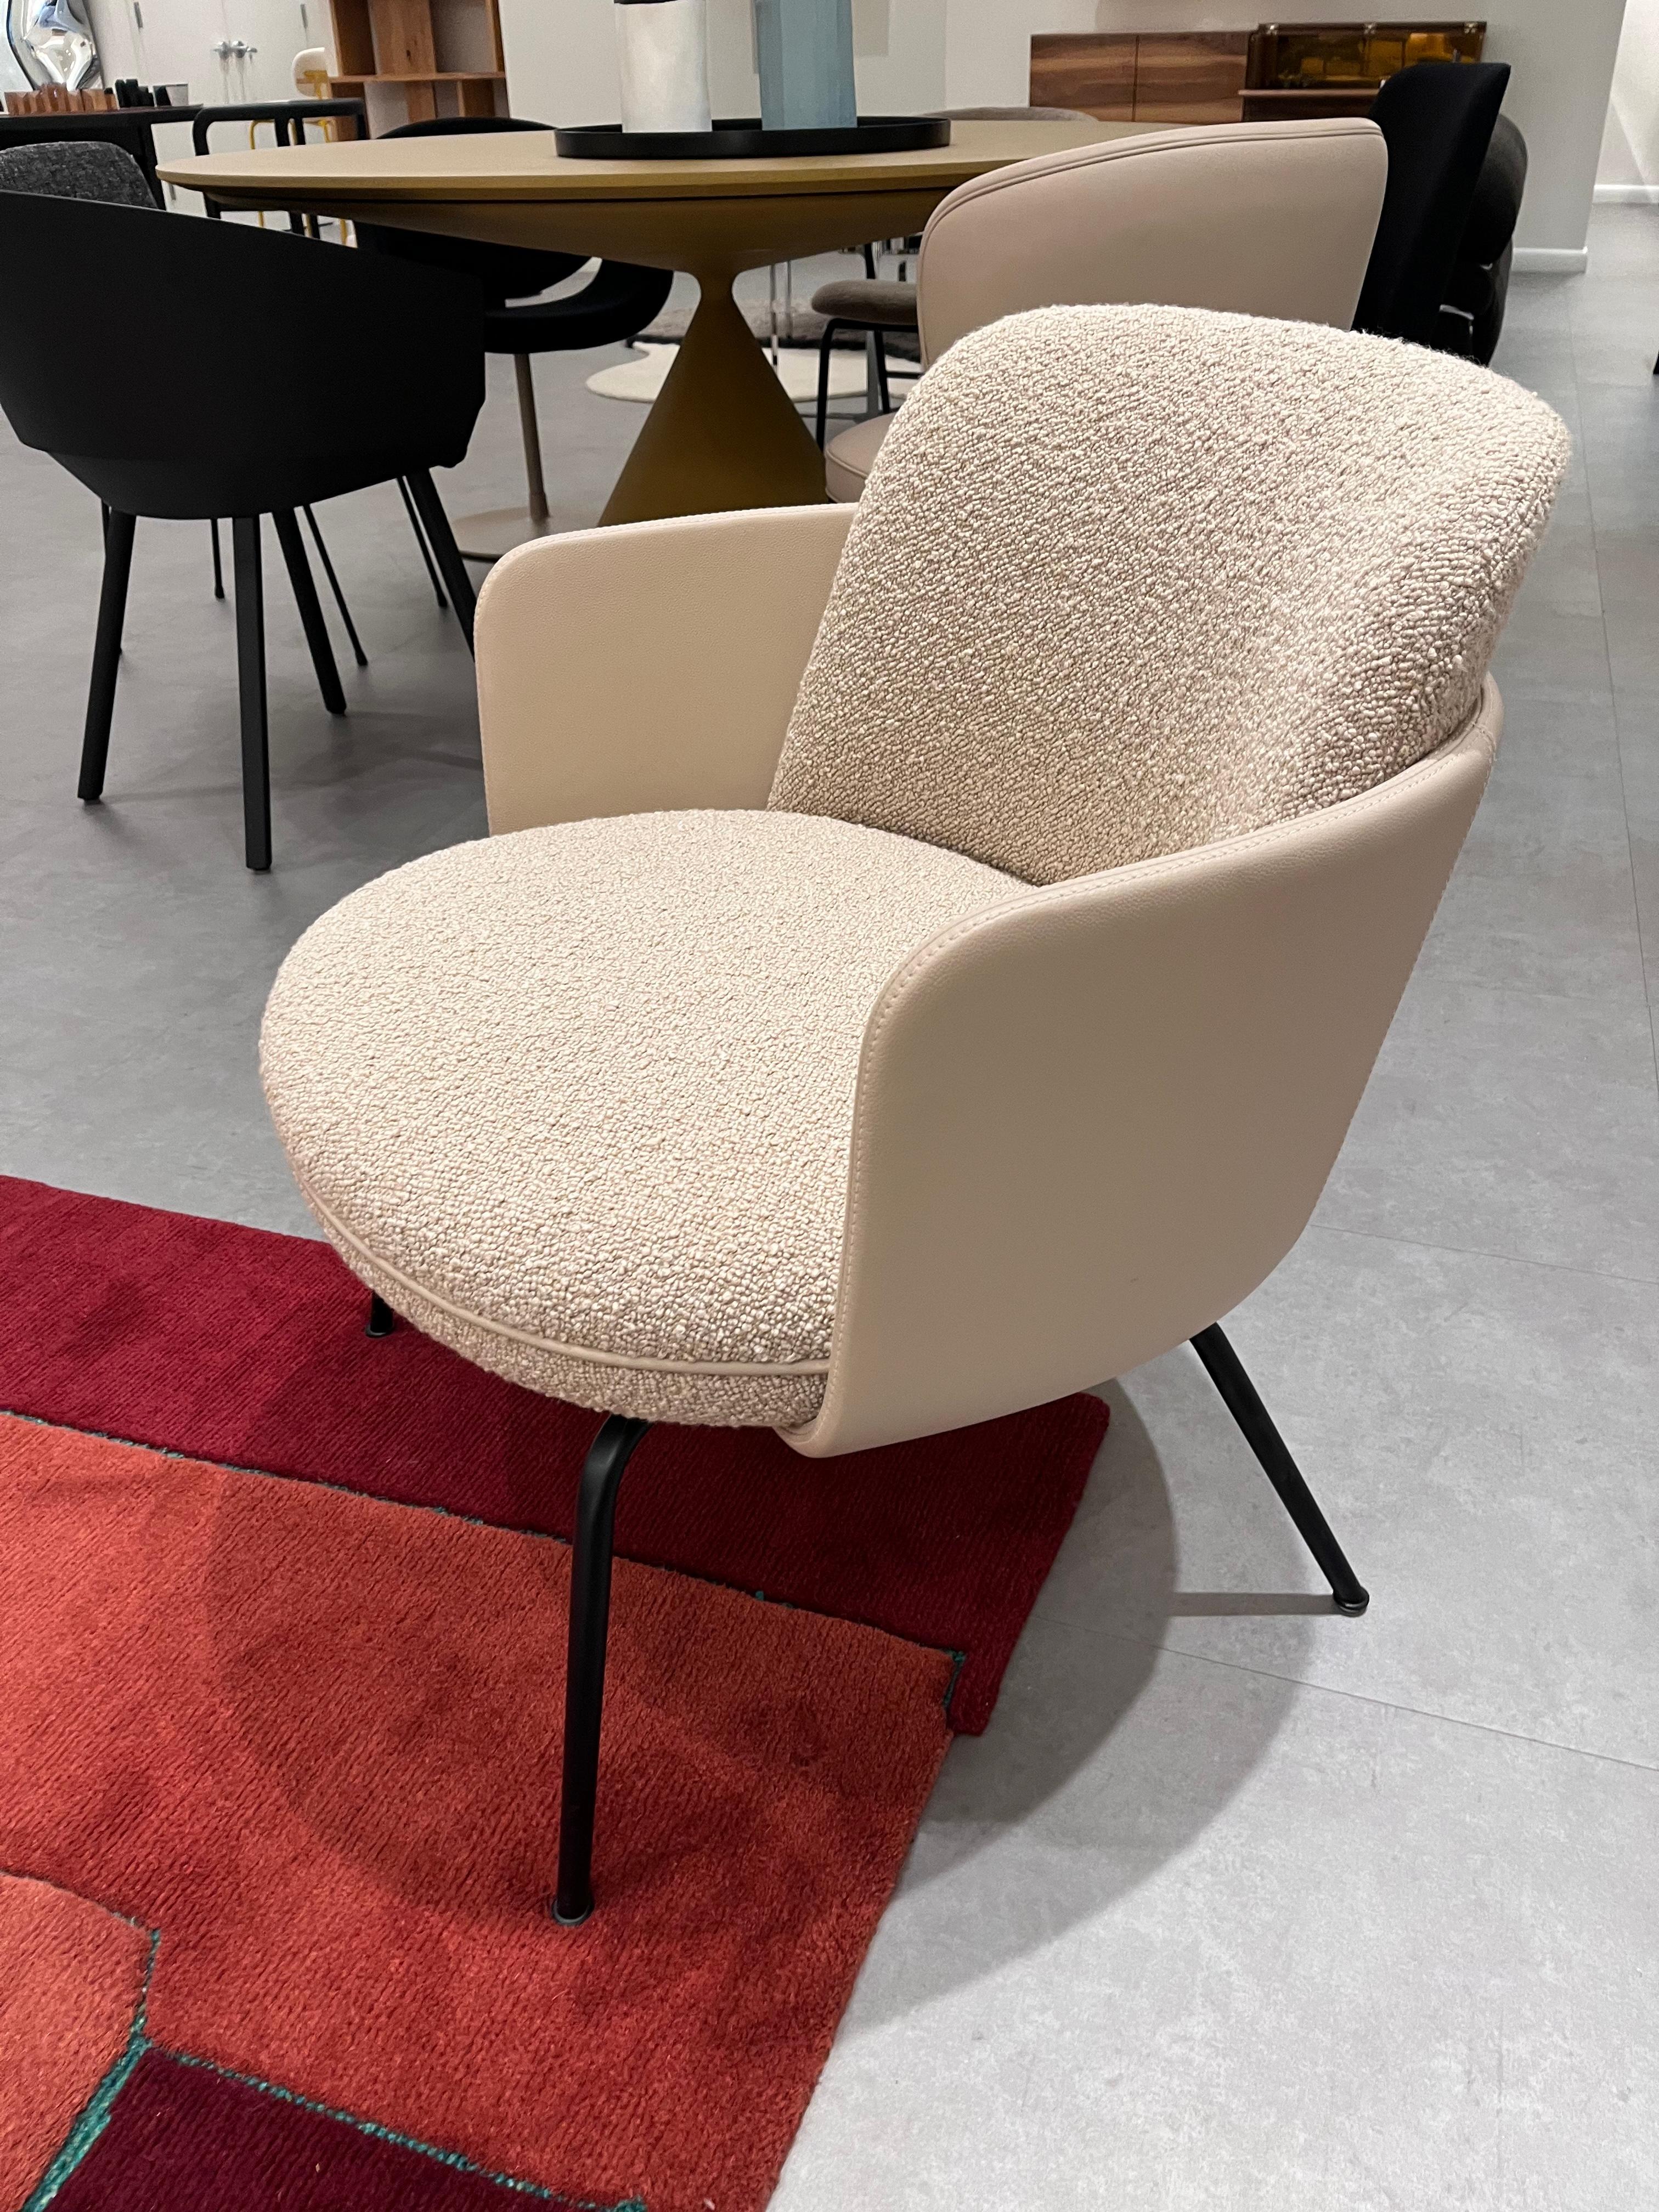 fabric Dedar KARAKORUM col. duna
Outside cover: Nappa stone
Legs: Black grey powder coated
The shape of the chair and sofa stirs up associations with classic armchairs and canapés. The precise upholstery is positioned above delicate, almost